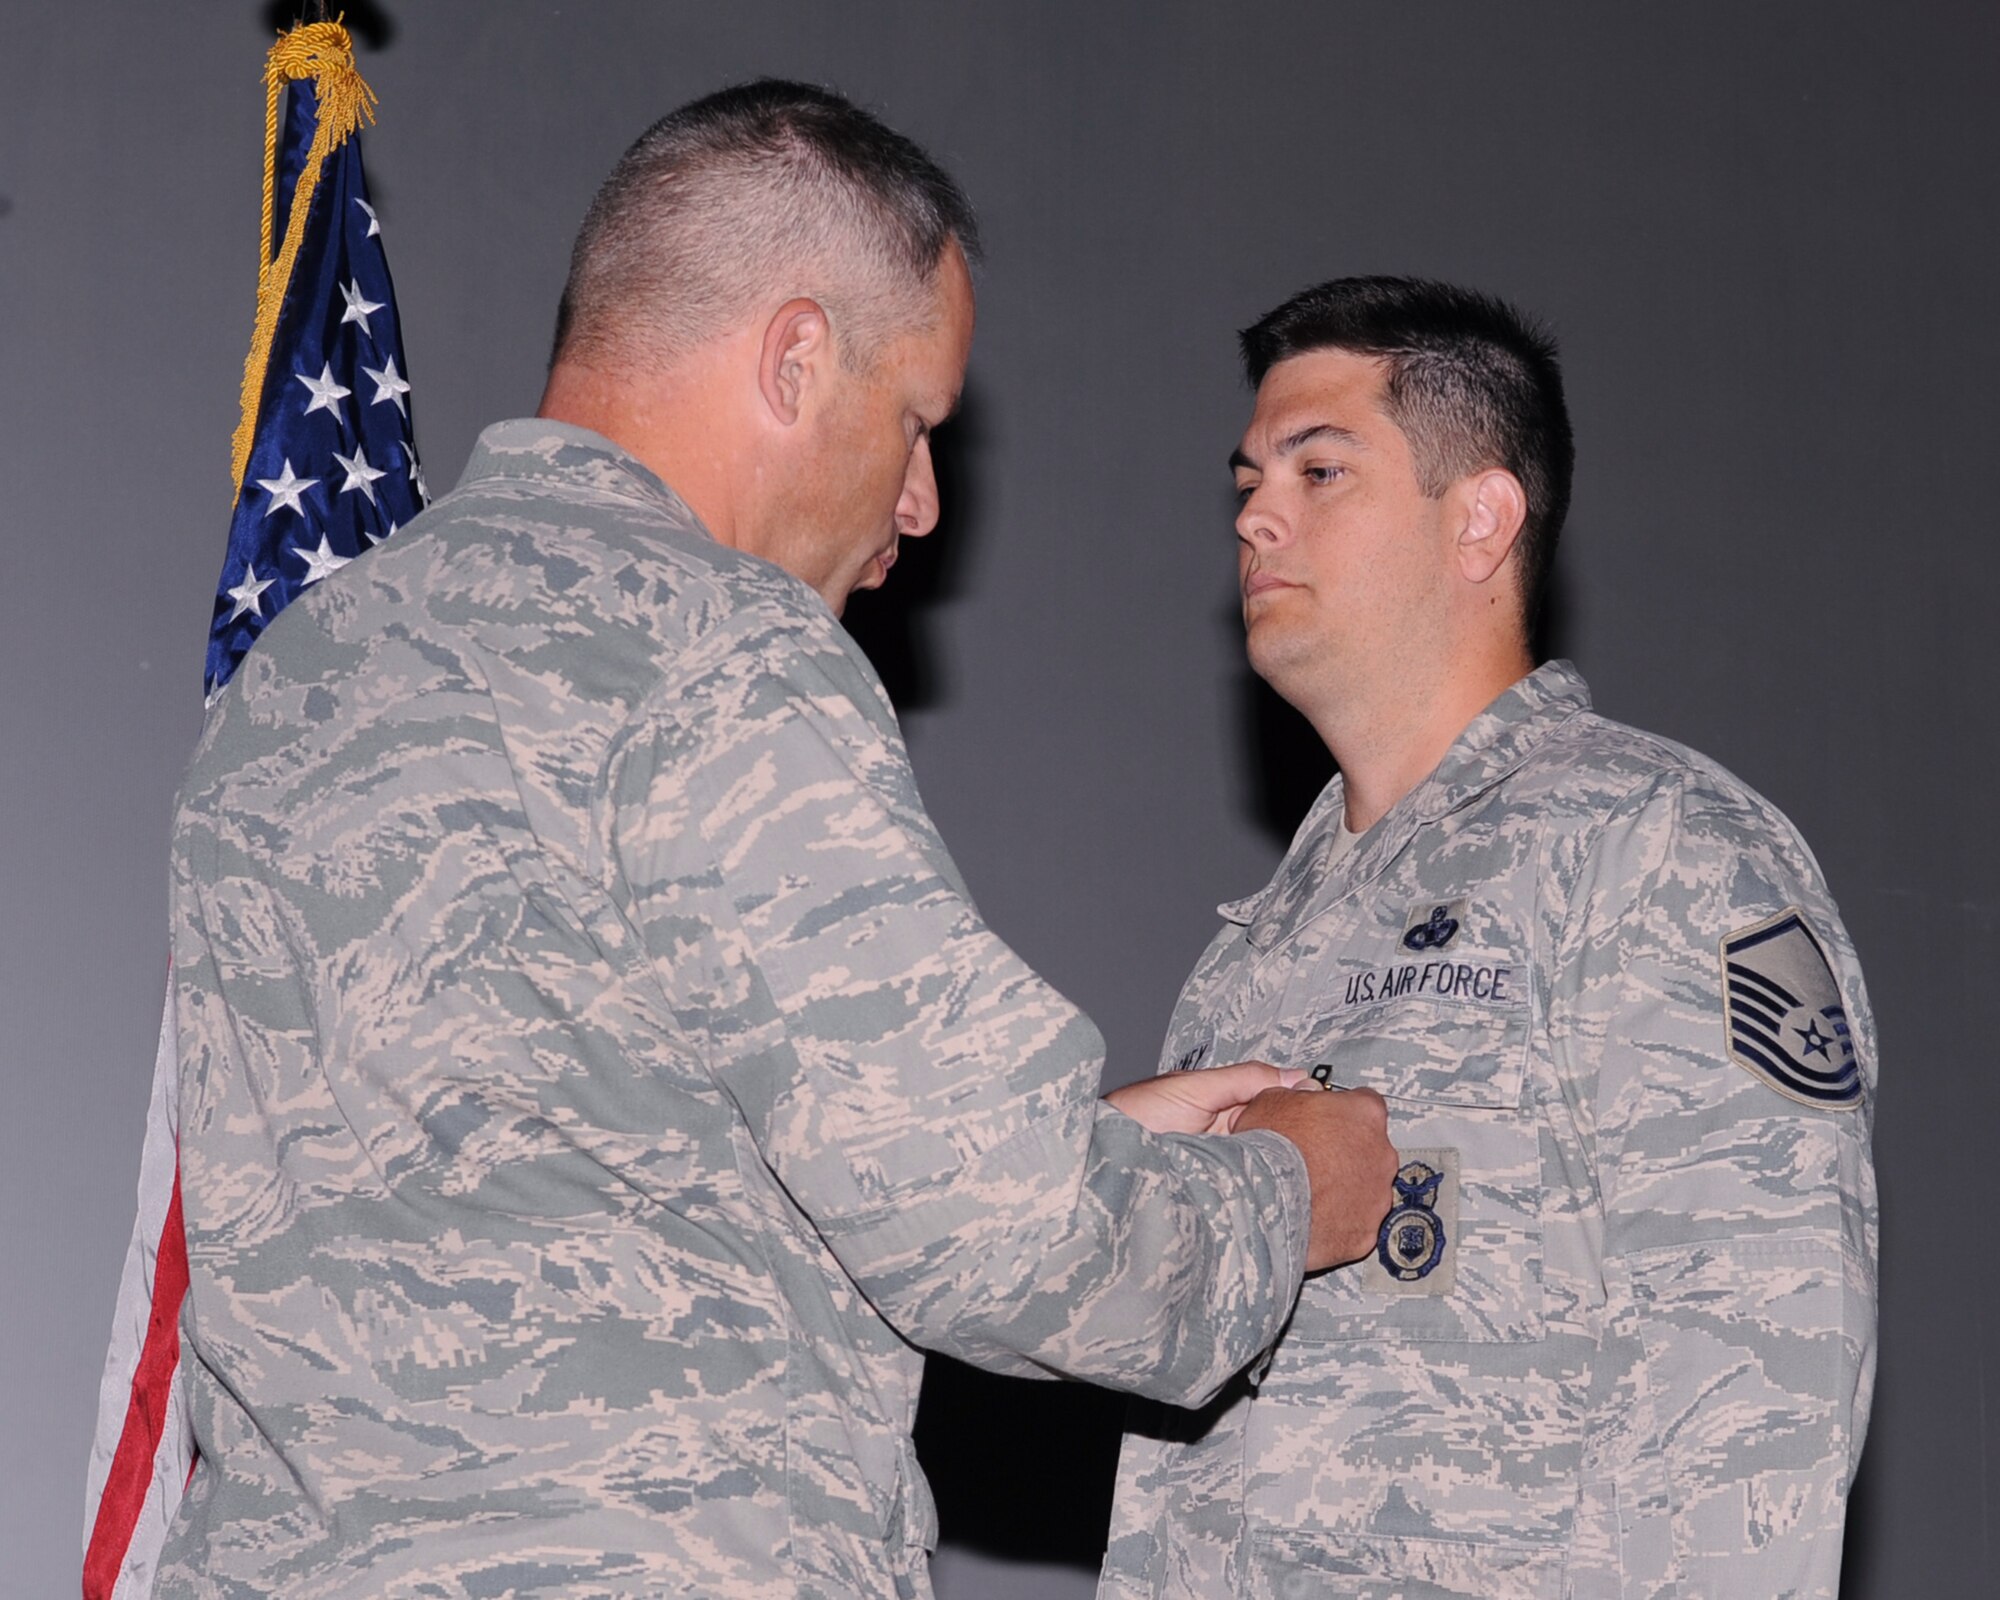 U.S. Air Force Col. Greg Williams, 355th Mission Support Group commander, pins Master Sgt. Brian LaMasney, 355th Security Force Squadron, with the Bronze Star medal on Davis-Monthan Air Force Base, Ariz., Sept. 6, 2012. Sergeant LaMasney received the star for his meritorious service while deployed overseas. (U.S. Air Force photo by Airman 1st Class Christine Griffiths/Released) 